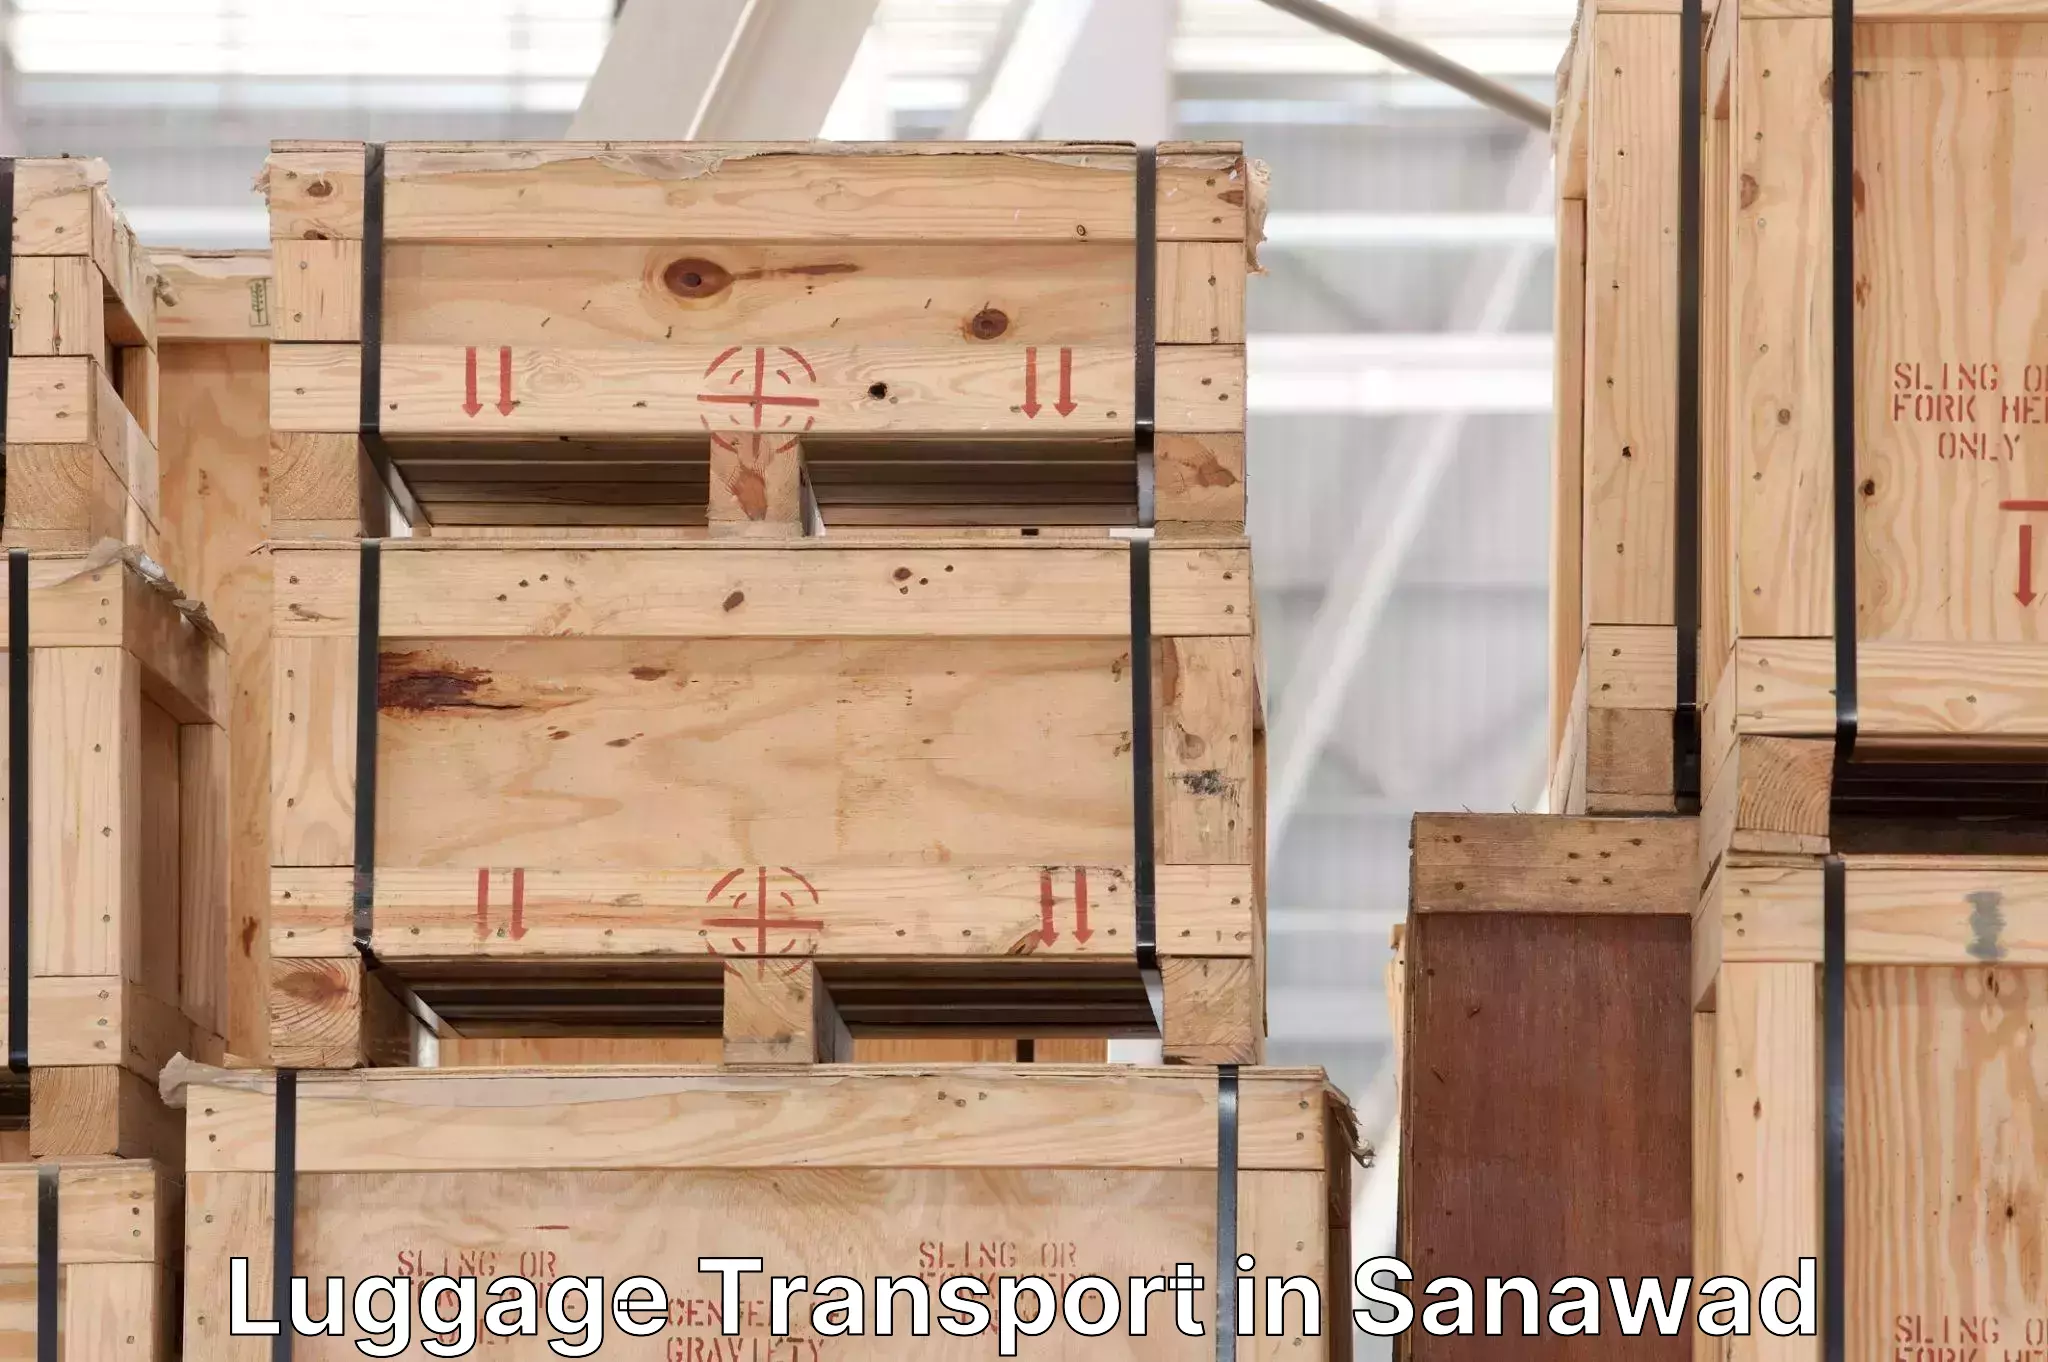 Luggage delivery operations in Sanawad